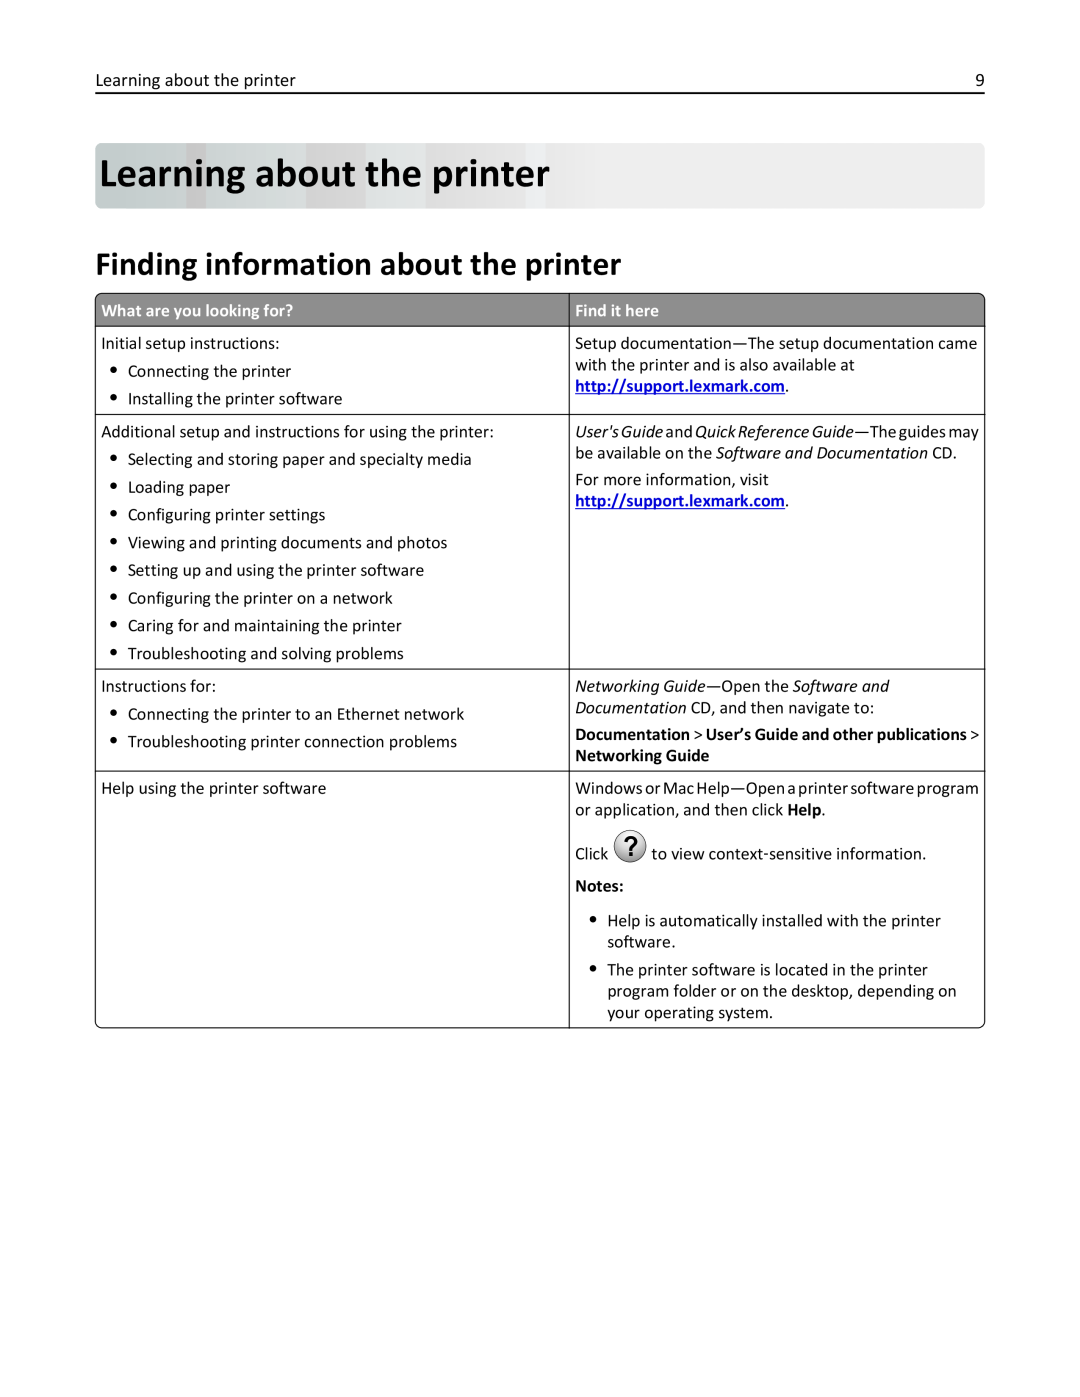 Lexmark 670 Learning about theprinter, Finding information about the printer, http//support.lexmark.com, Networking Guide 